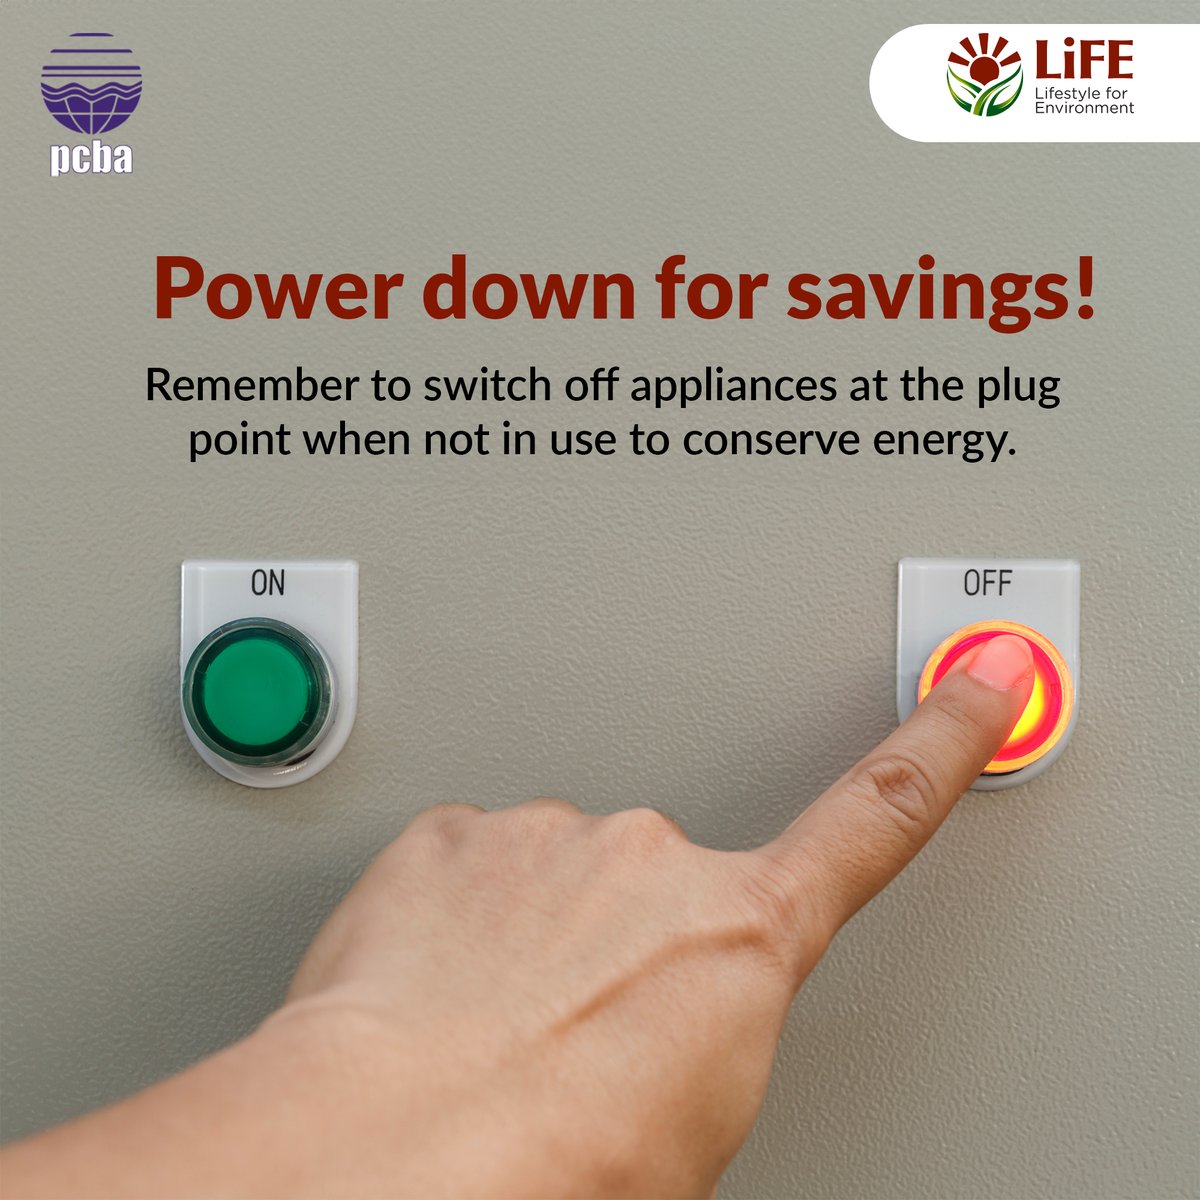 Make it a habit to switch off appliances at the socket when you're not using them to conserve energy.

#EnergyConservation #Energy #Conservation #Sustainability #EnergySaving